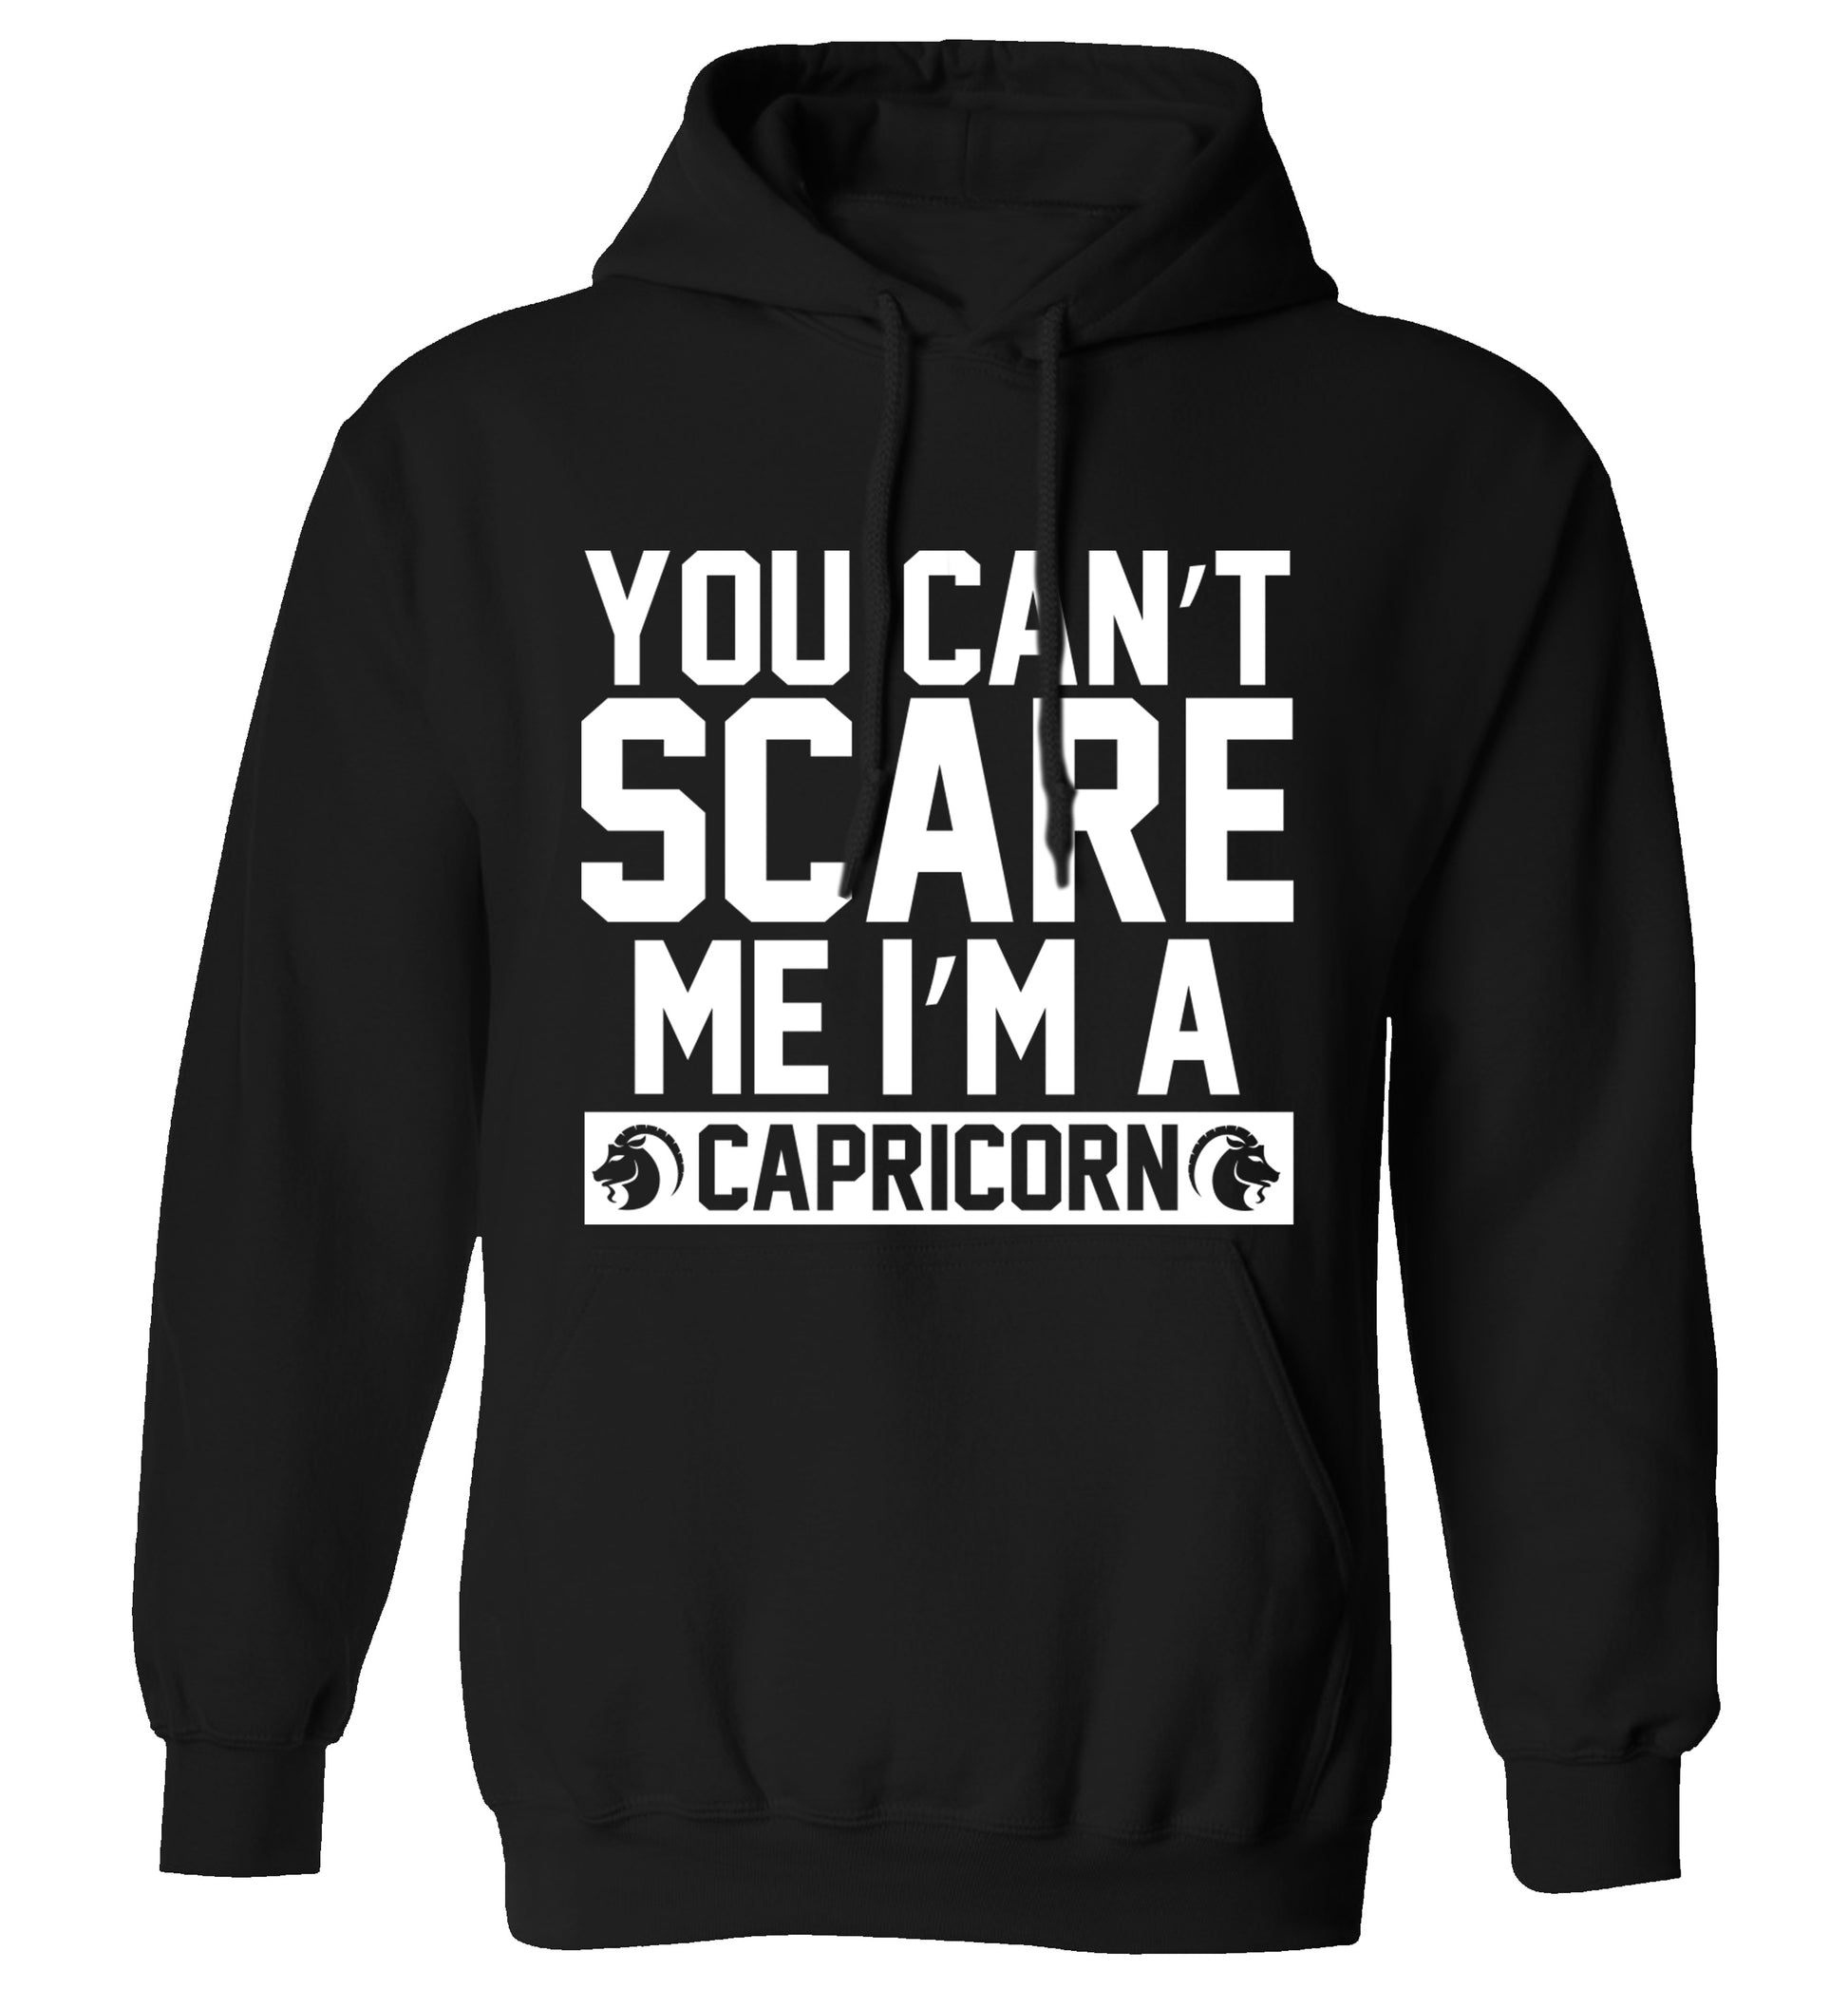 You can't scare me I'm a capricorn adults unisex black hoodie 2XL